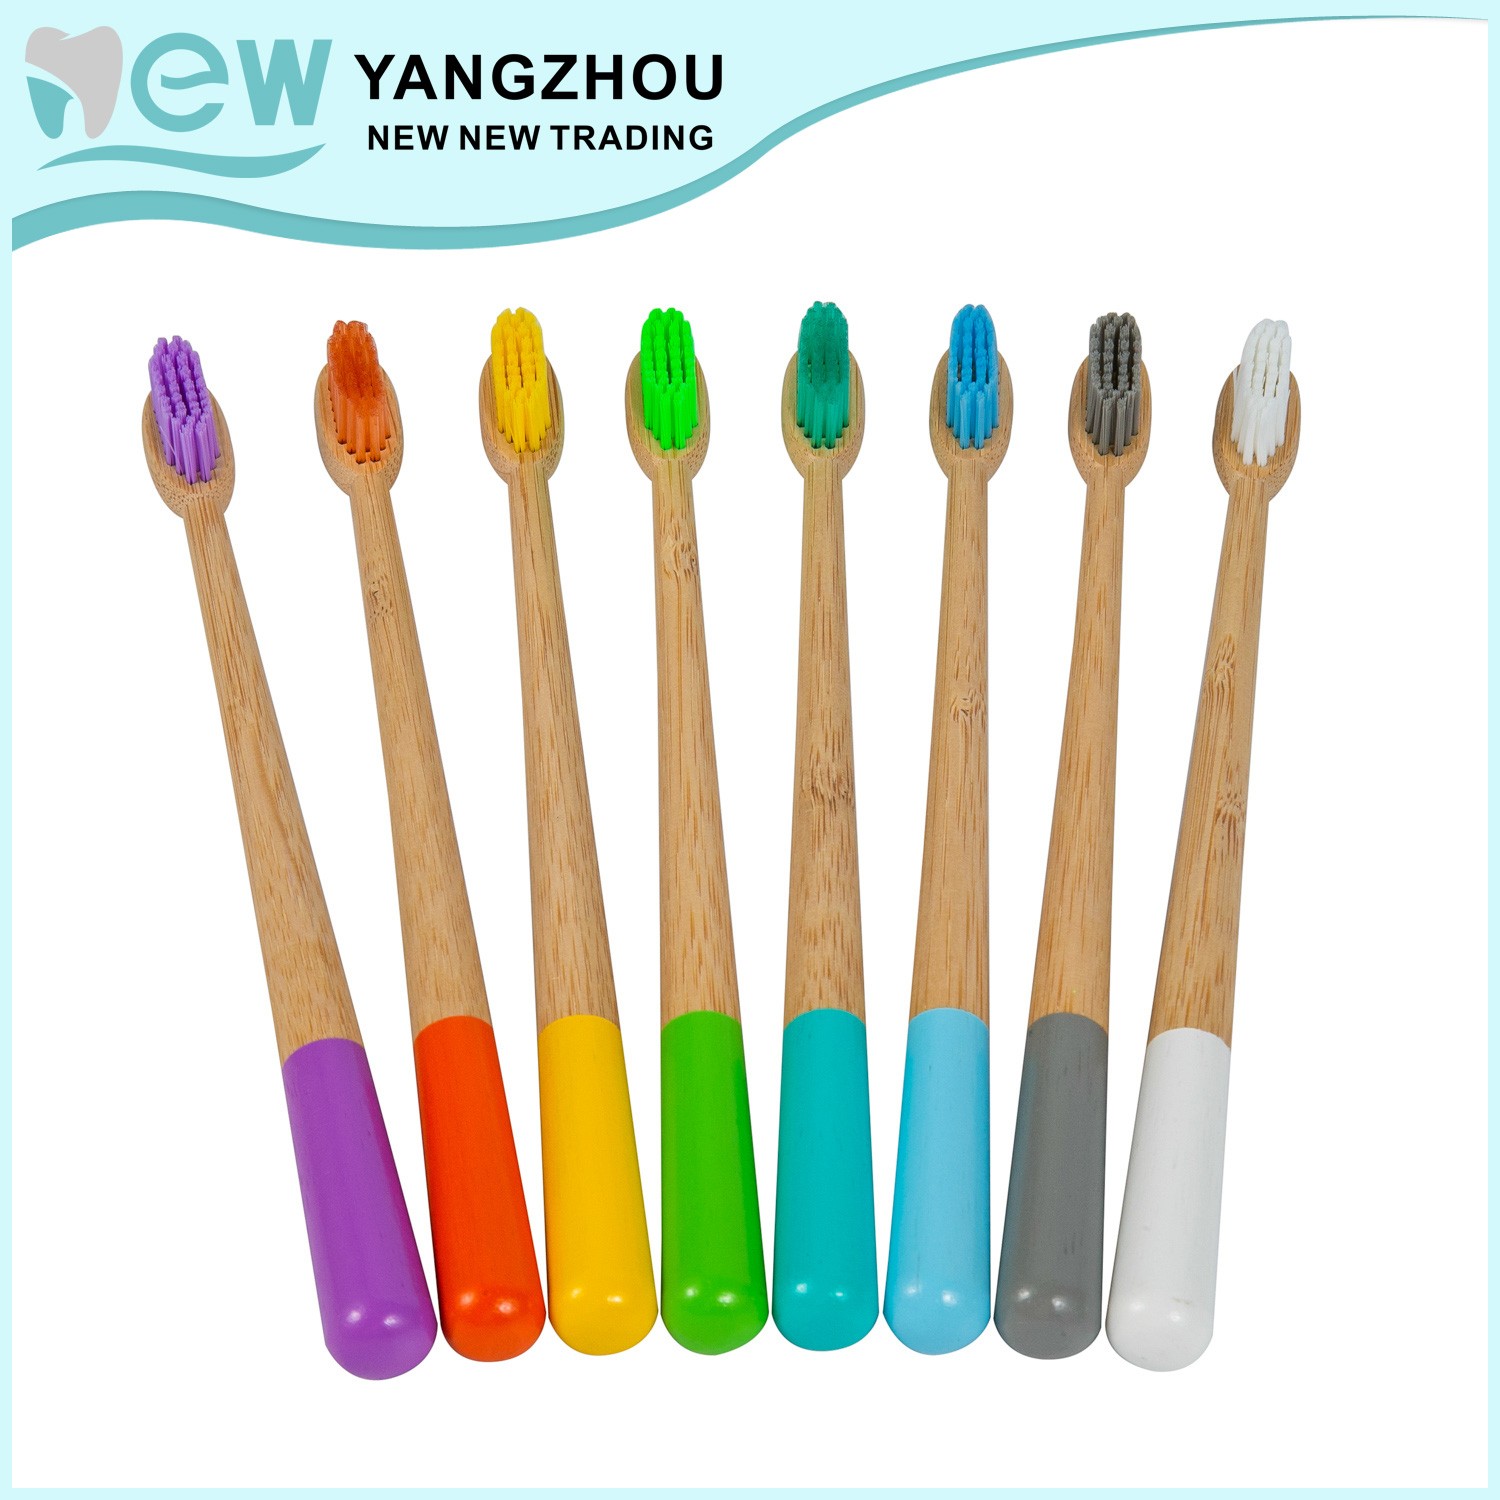 bamboo toothbrush with colorful handle